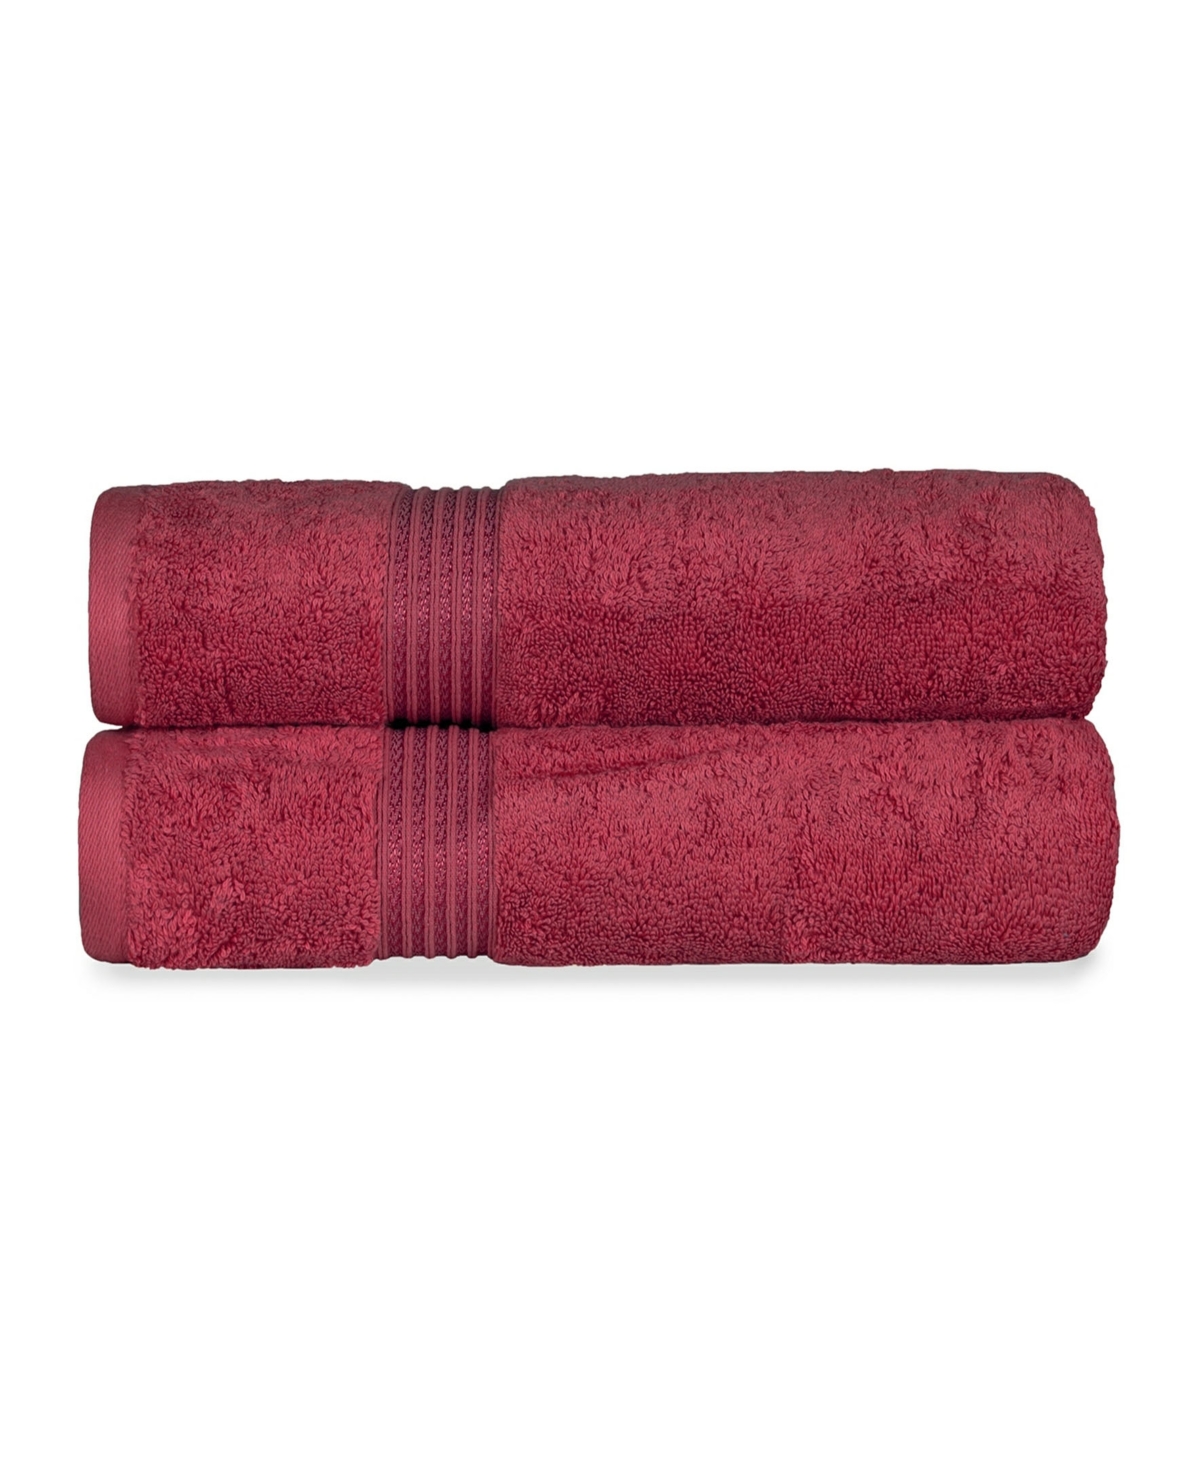 Superior Solid Quick Drying Absorbent 2 Piece Egyptian Cotton Bath Sheet Towel Set Bedding In Burgundy